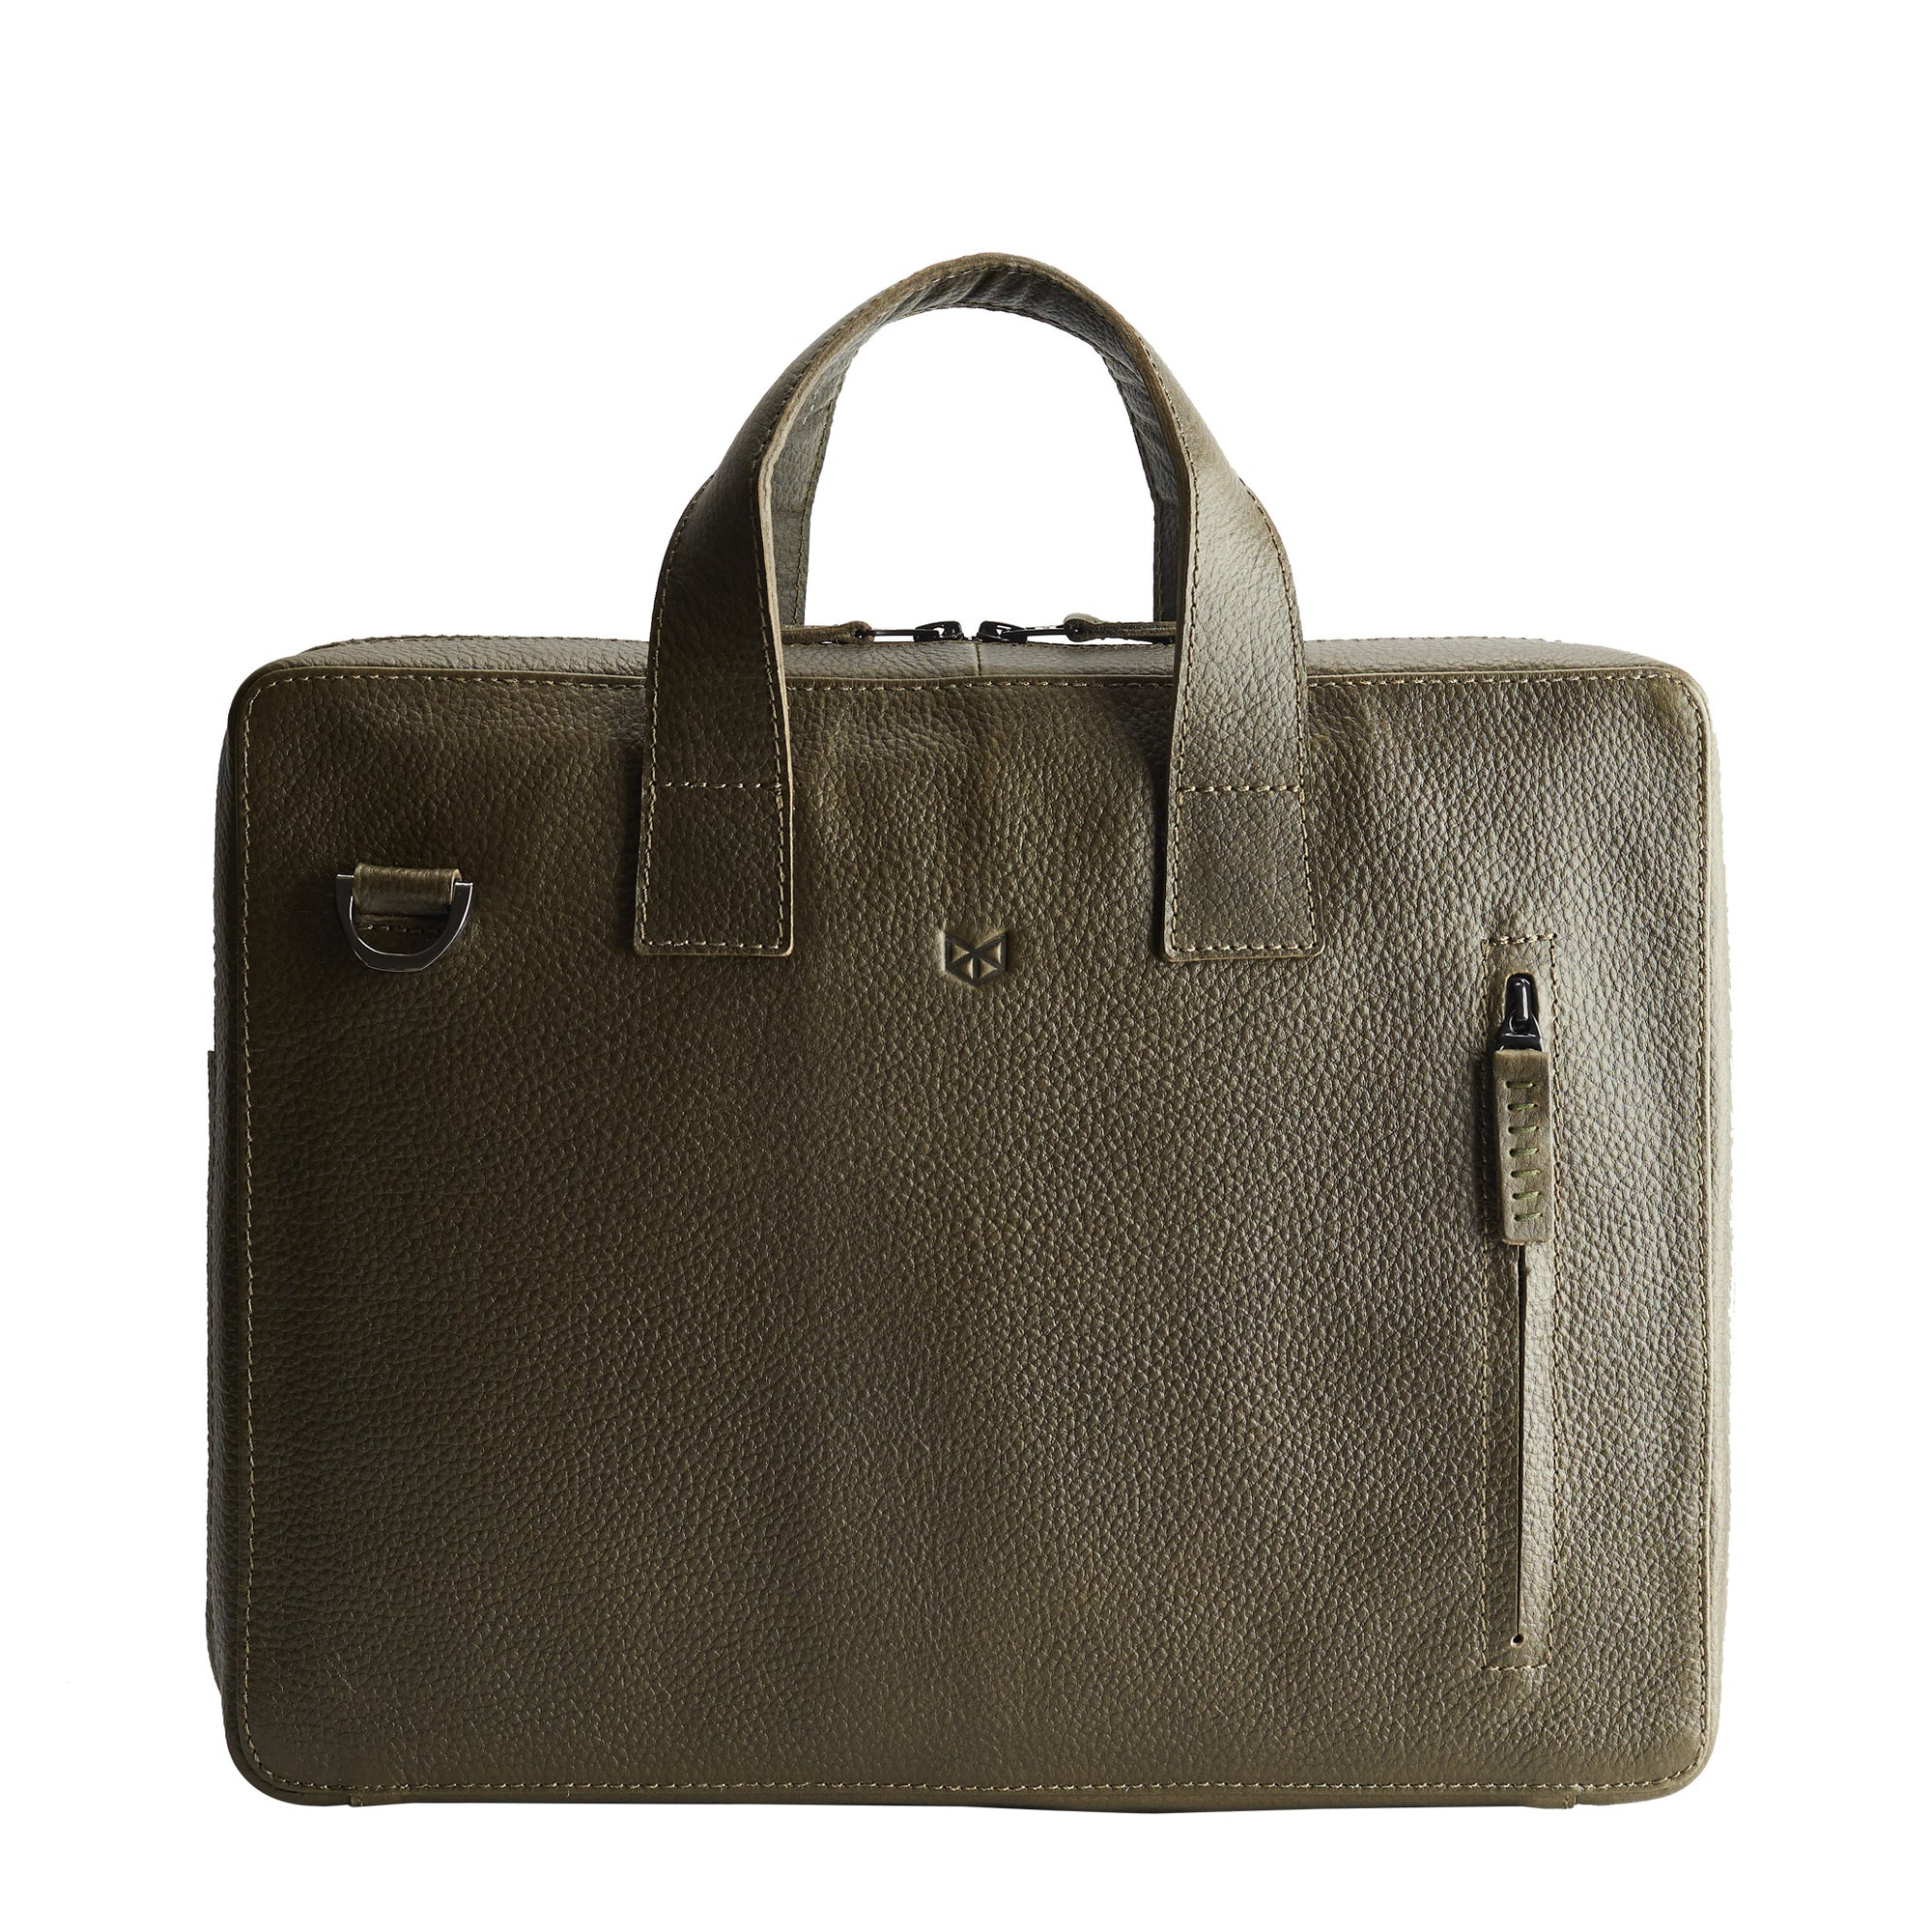 Green leather workbag for men. Unique office style bag